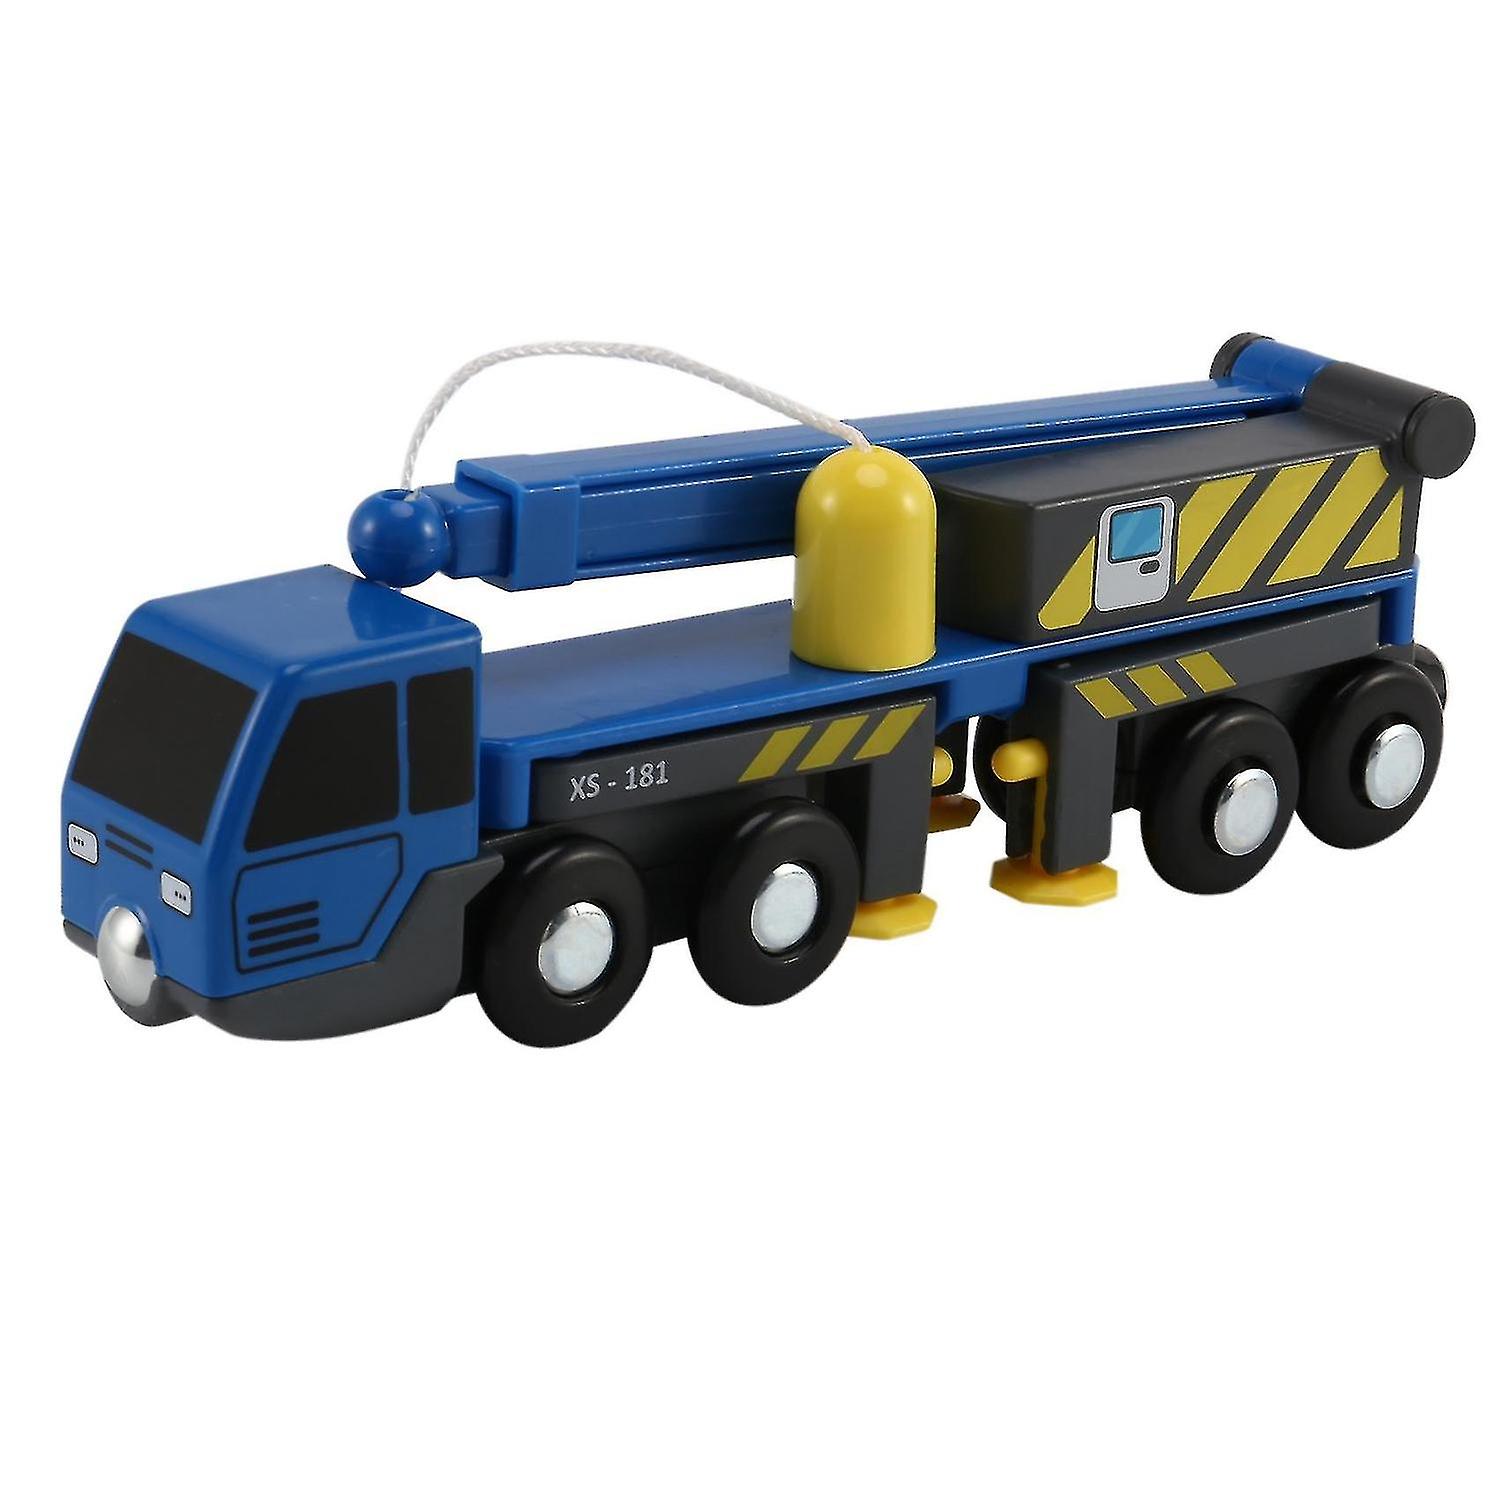 Crane Truck Vheicles Kids Toy Compatible With Wooden Tracks Railway